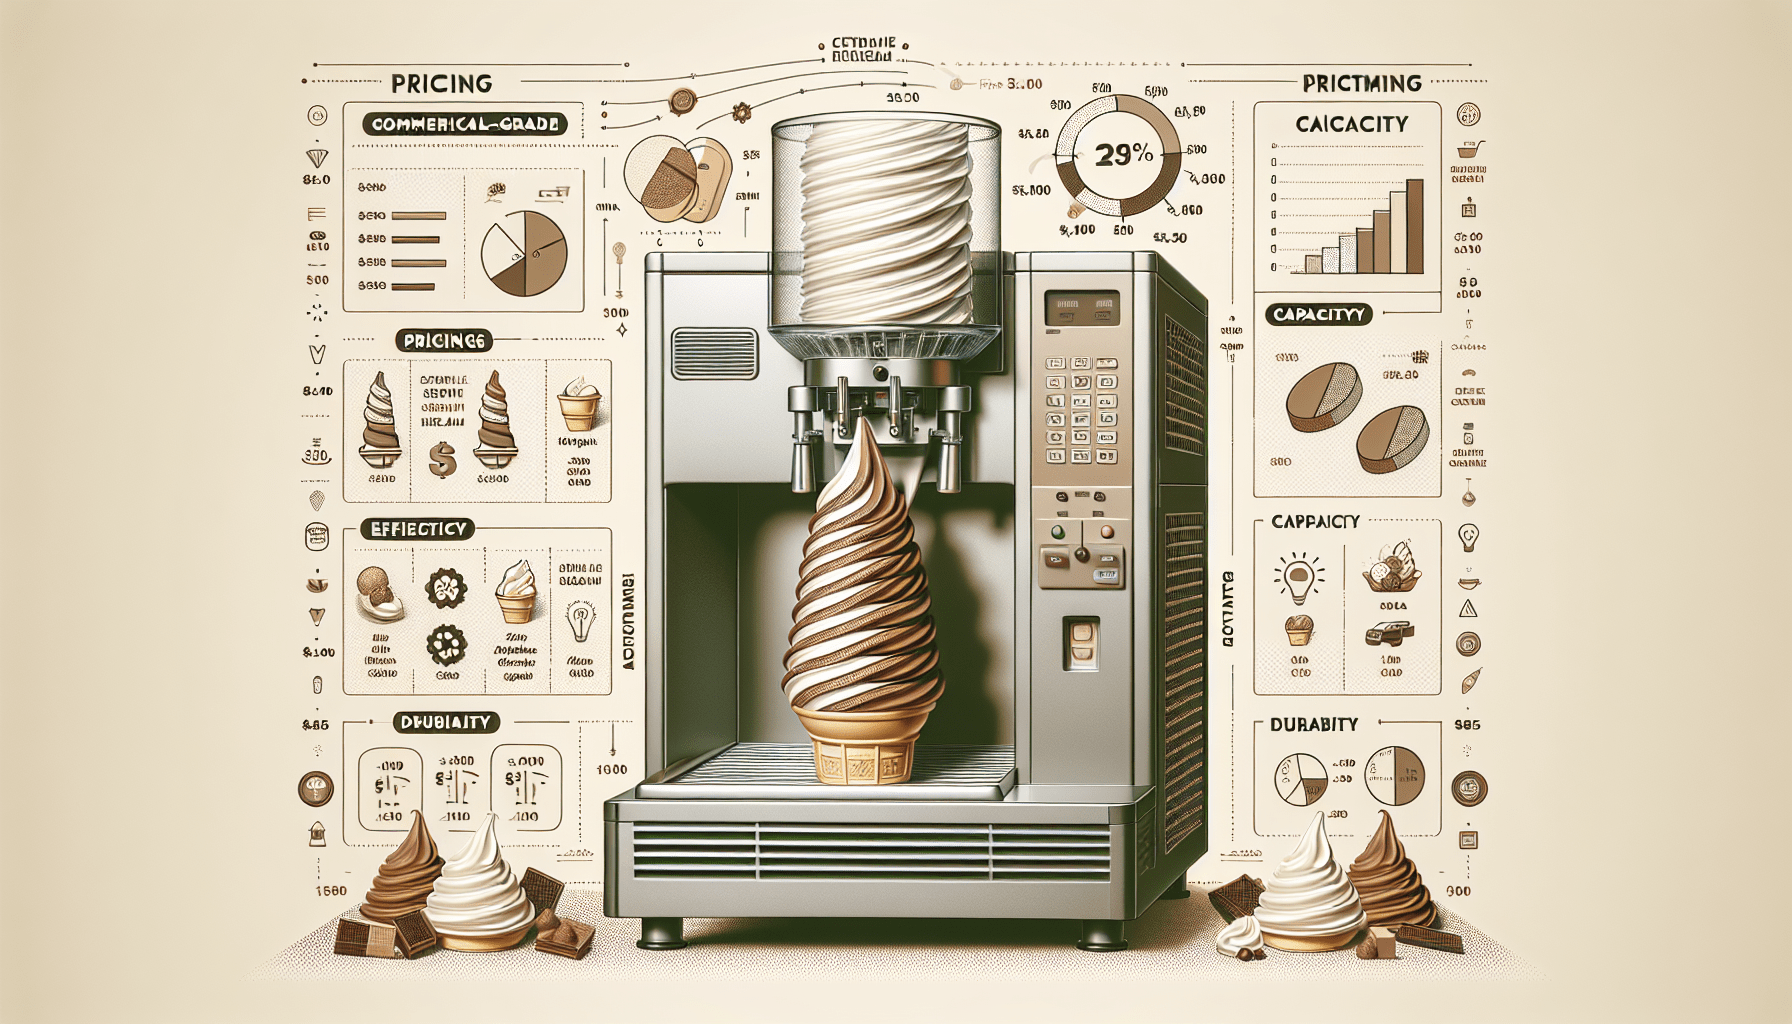 The Ultimate Guide to Finding the Best Soft Serve Ice Cream Machine for Your Commercial Business